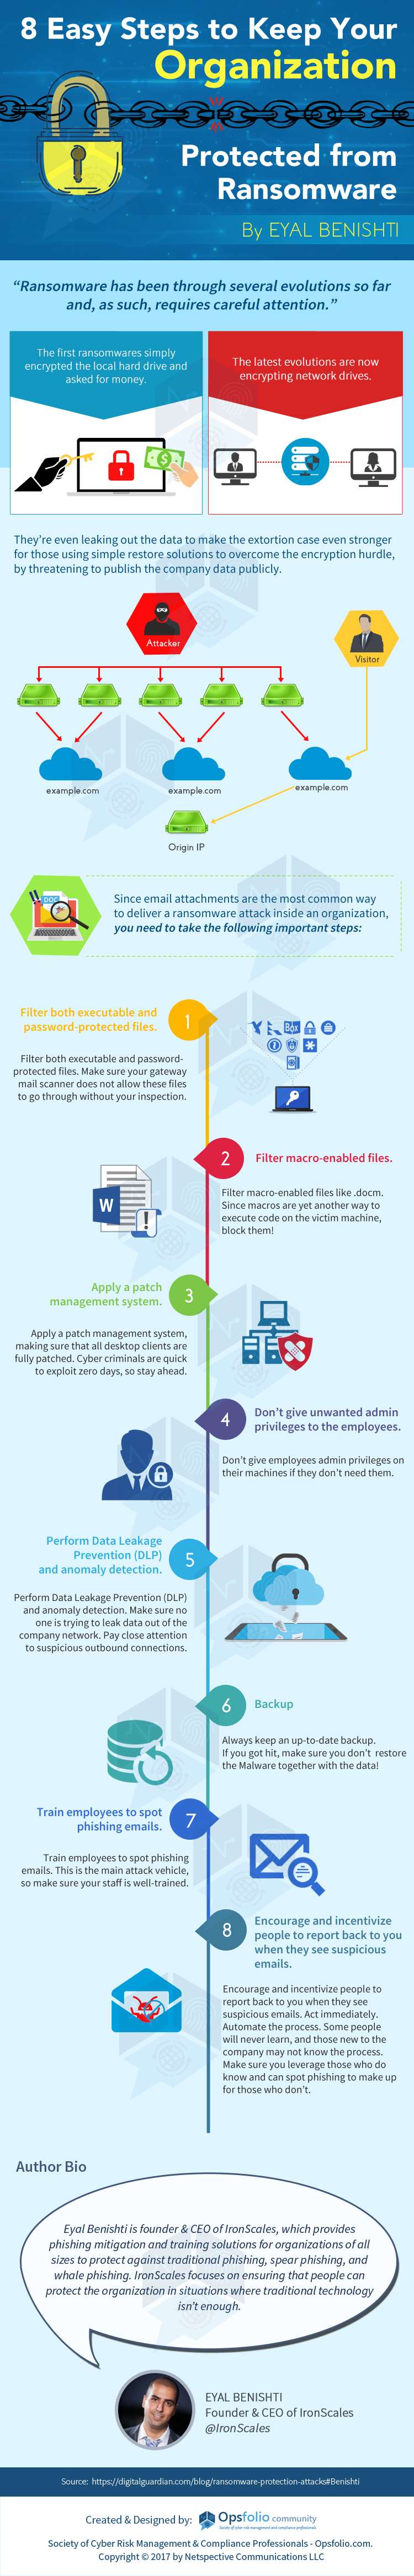 8 Easy Steps to Keep Your Organization Protected from Ransomware